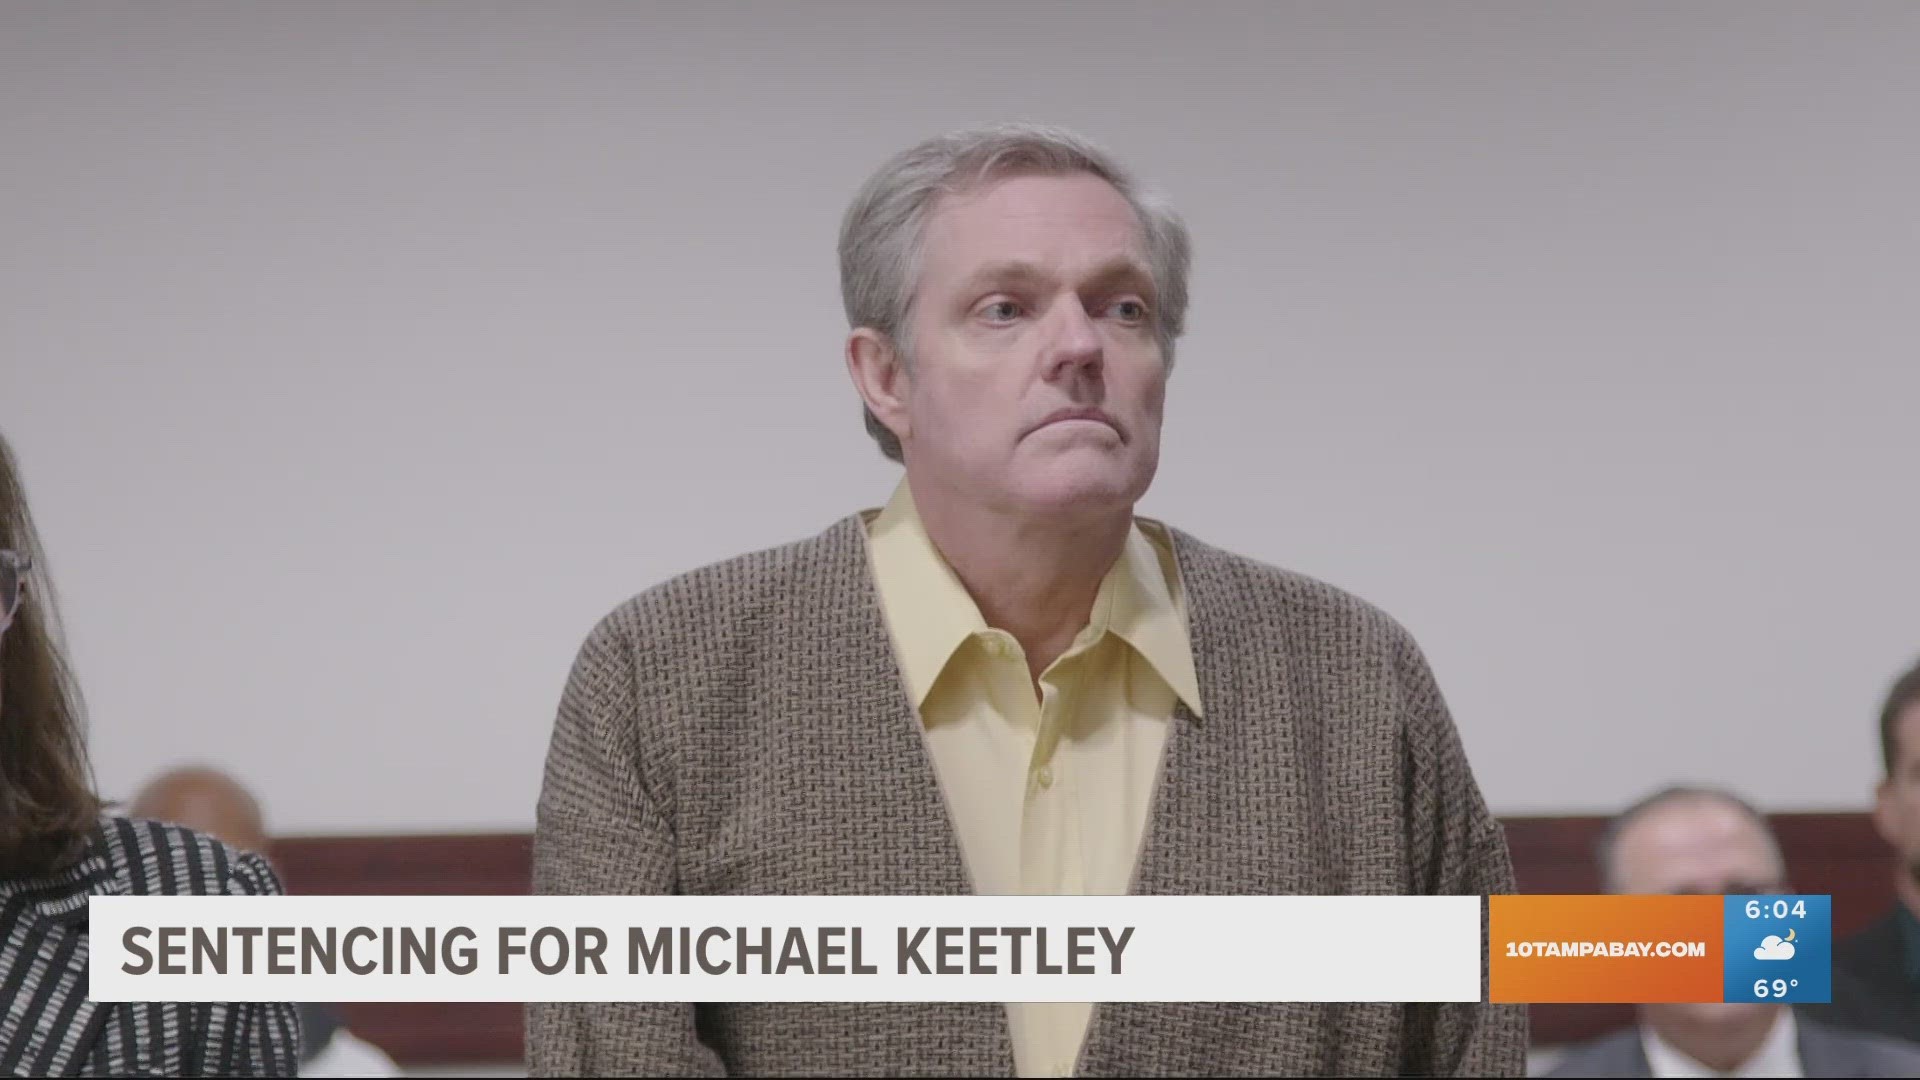 In a few hours, Michael Keetley will be sentenced for murdering two brothers.